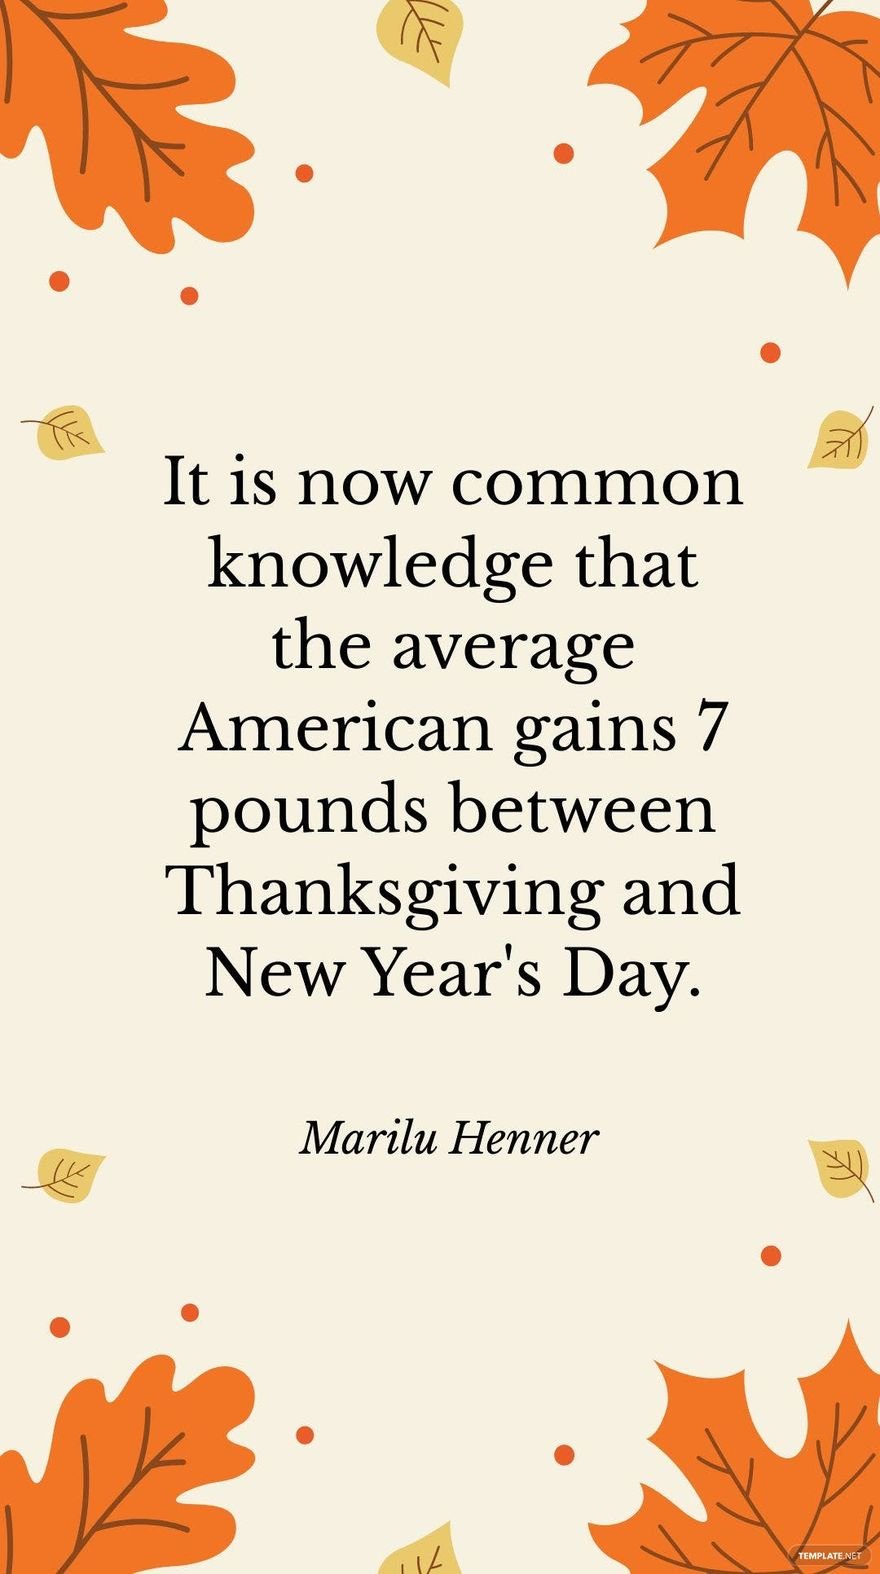 Marilu Henner - It is now common knowledge that the average American gains 7 pounds between Thanksgiving and New Year's Day. in JPG